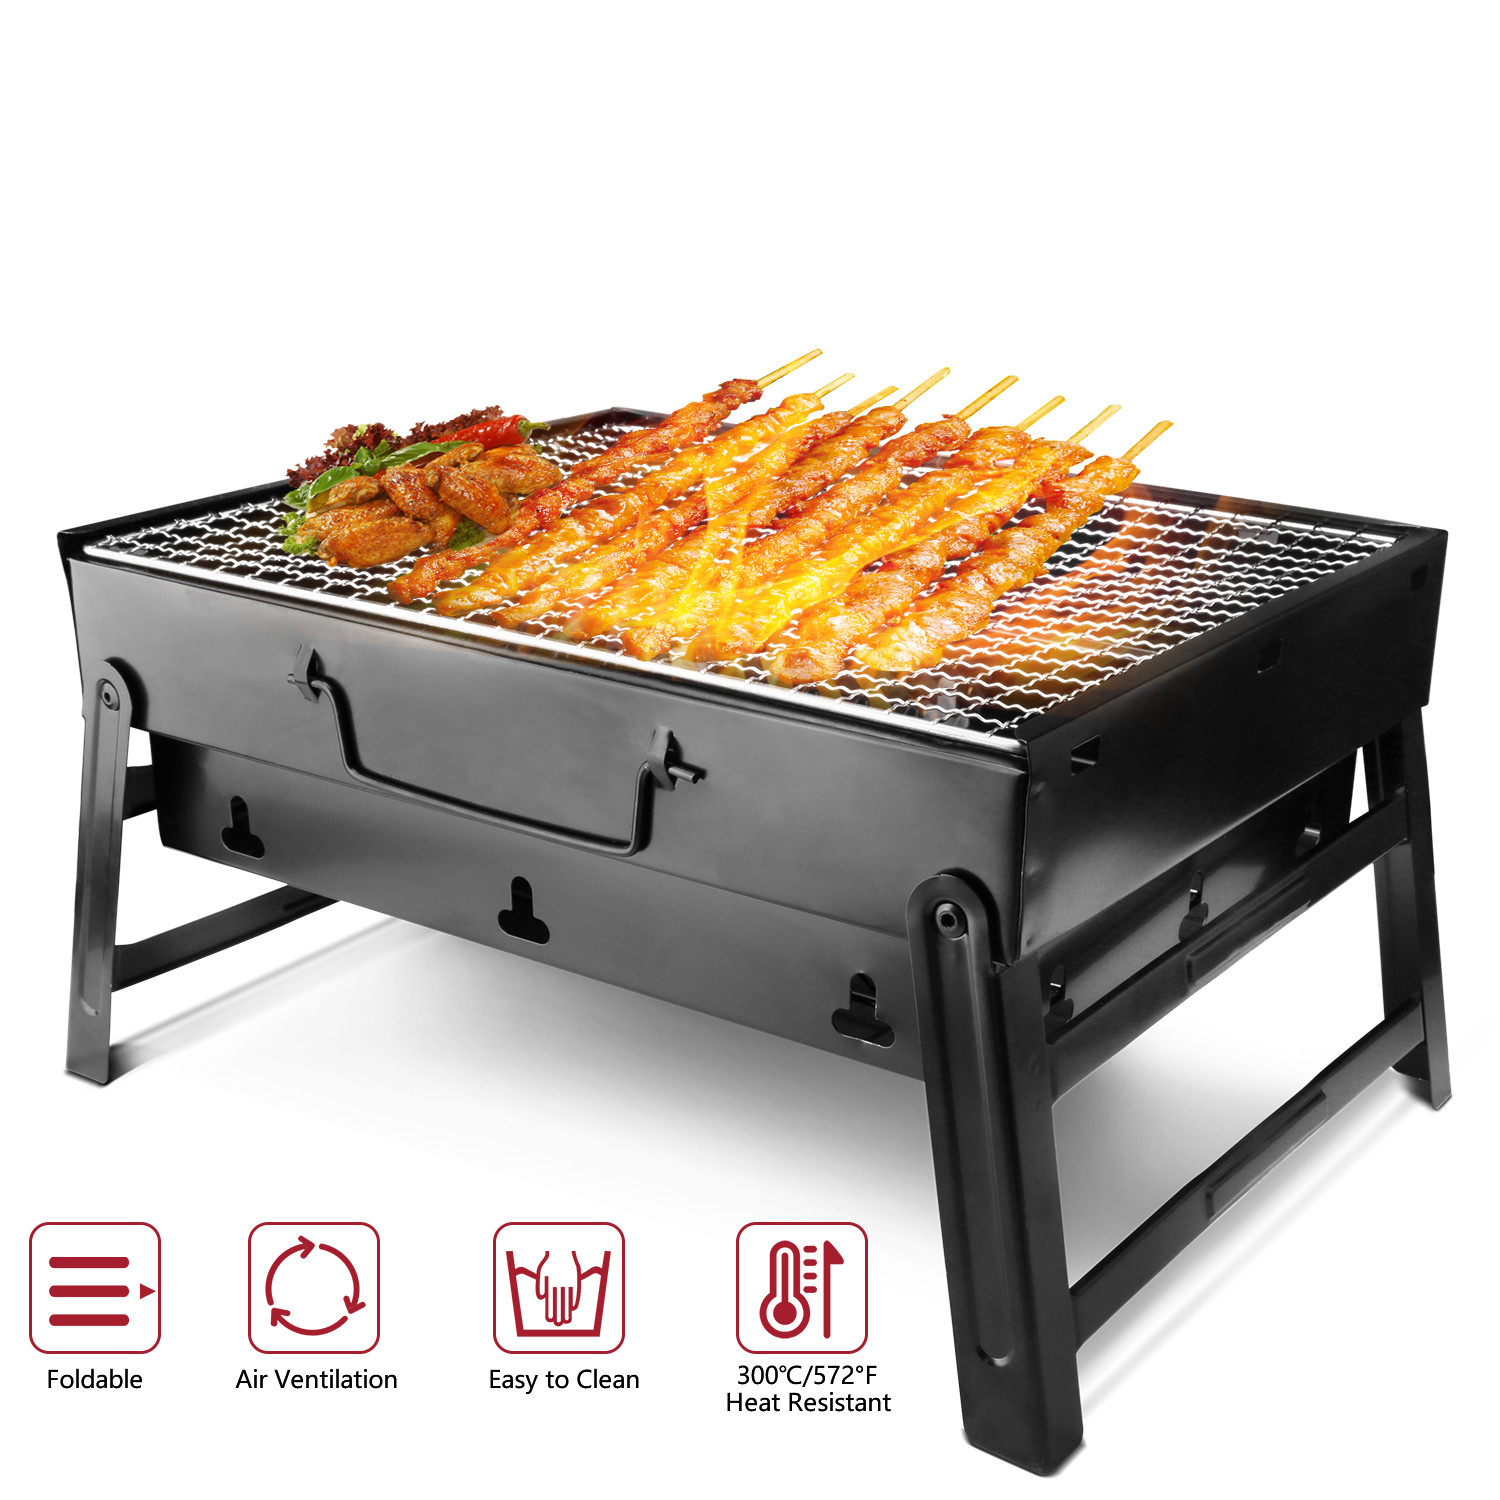 Htwon 13.7" Foldable BBQ Charcoal Grill, Portable Heavy Duty Barbecue Stainless Steel Tabletop Grill Stove with Handle Outdoor Camping Picnic Barbecue BBQ Accessories Tools - image 4 of 14